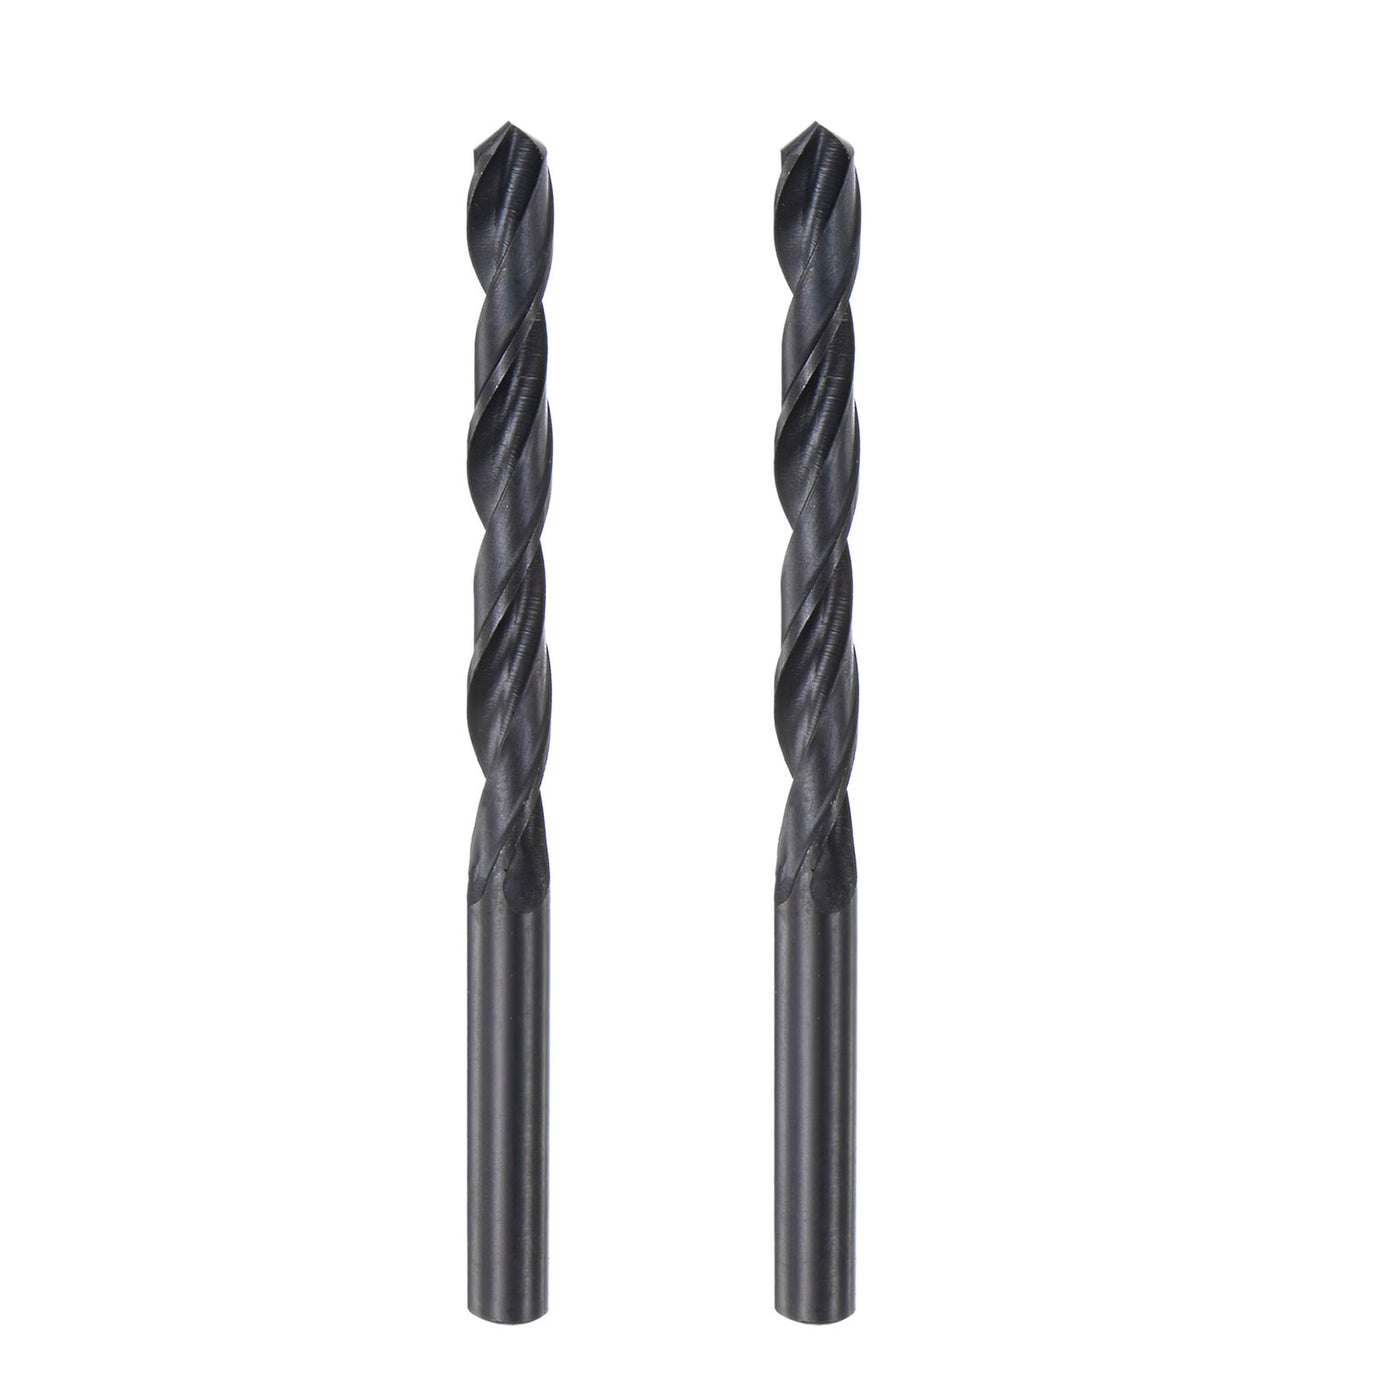 uxcell Uxcell High Speed Steel Twist Drill Bit, 7.5mm Fully Ground Black Oxide 108mm Long 2Pcs